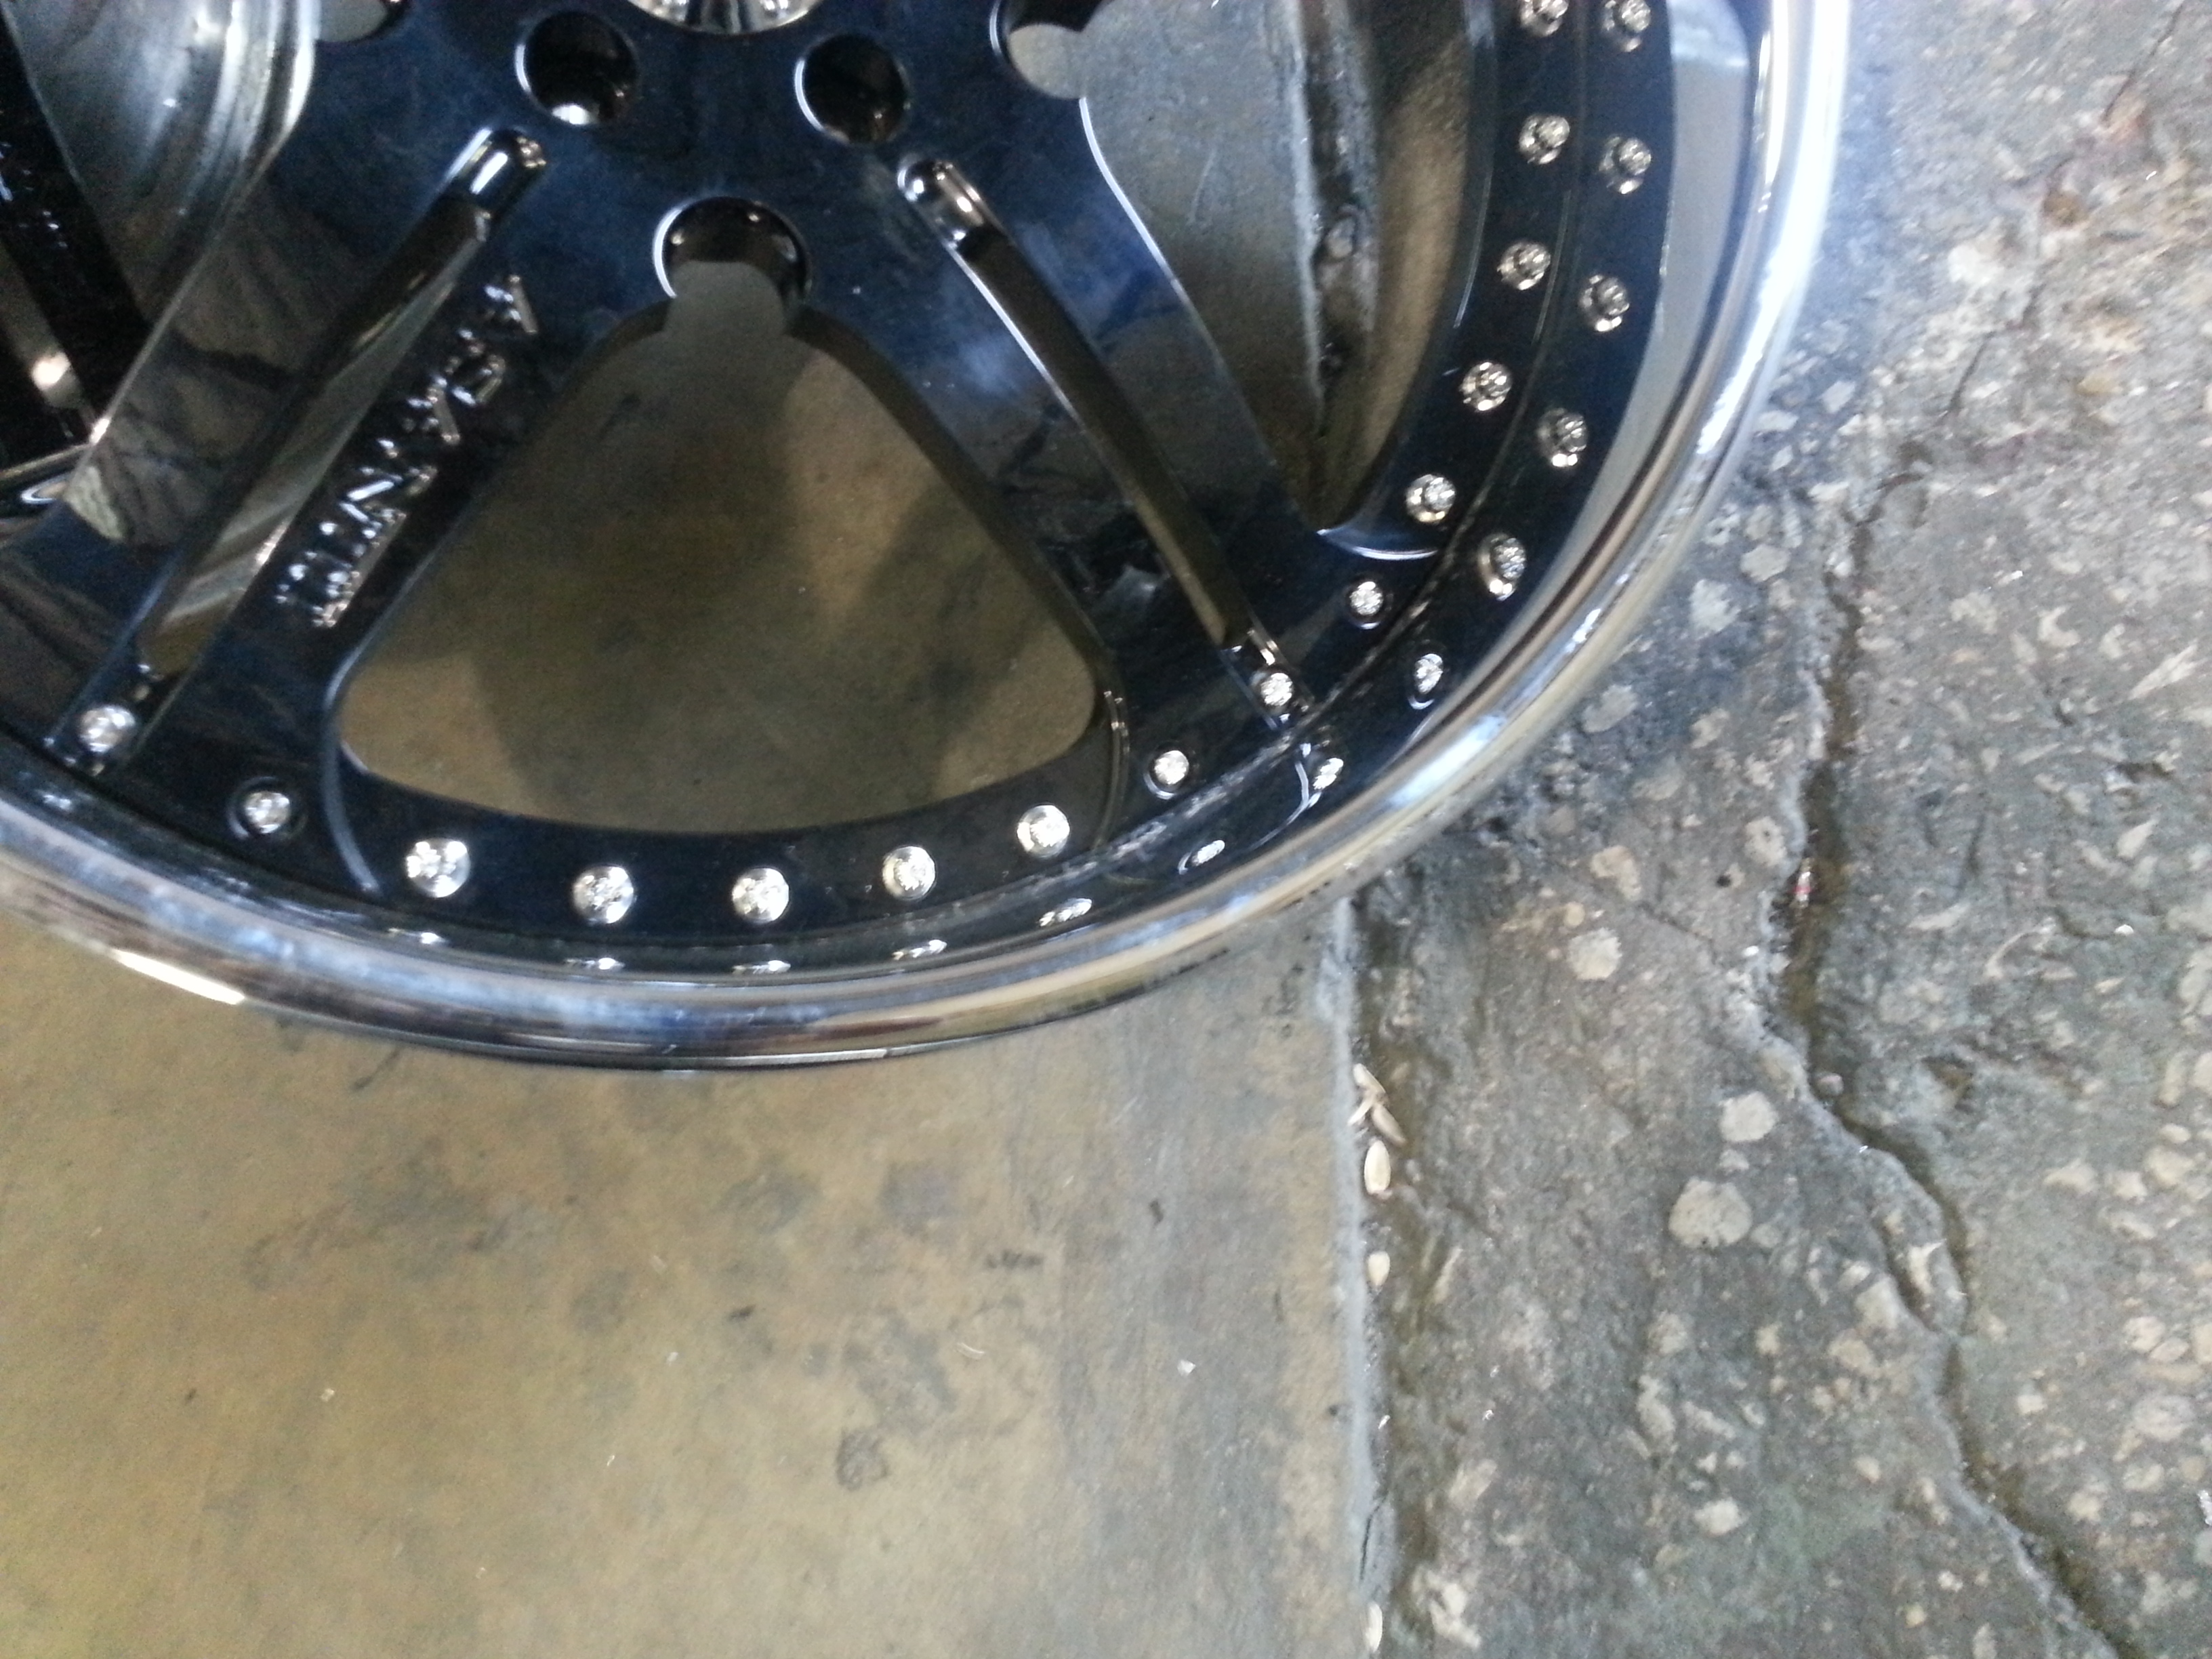 Damaged bent 22 inch asanti wheel pic 3 with chrome chipping and road rash